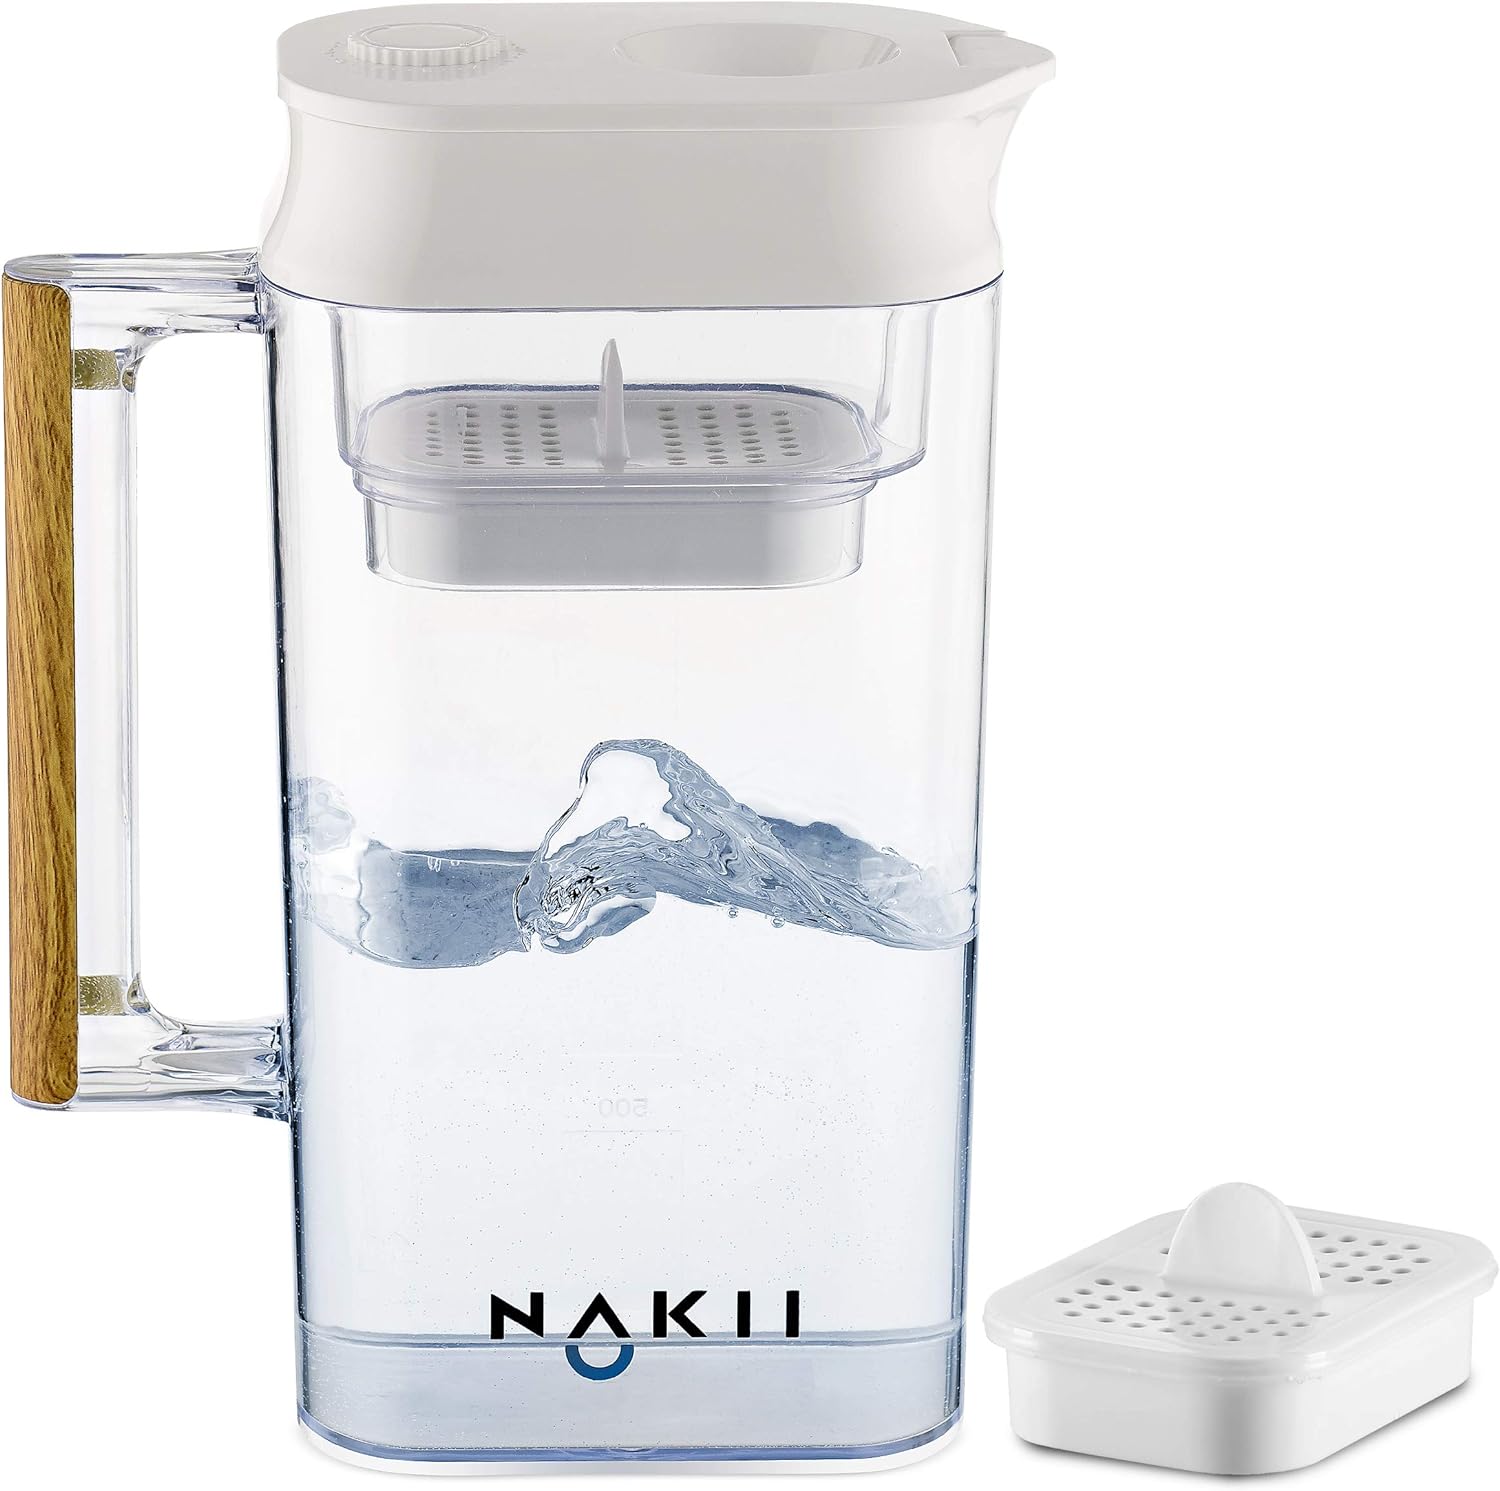 Nakii Water Filter Pitcher - Long Lasting 150 Gallons, Supreme Fast Filtration and Purification Technology, Removes Chlorine, Metals